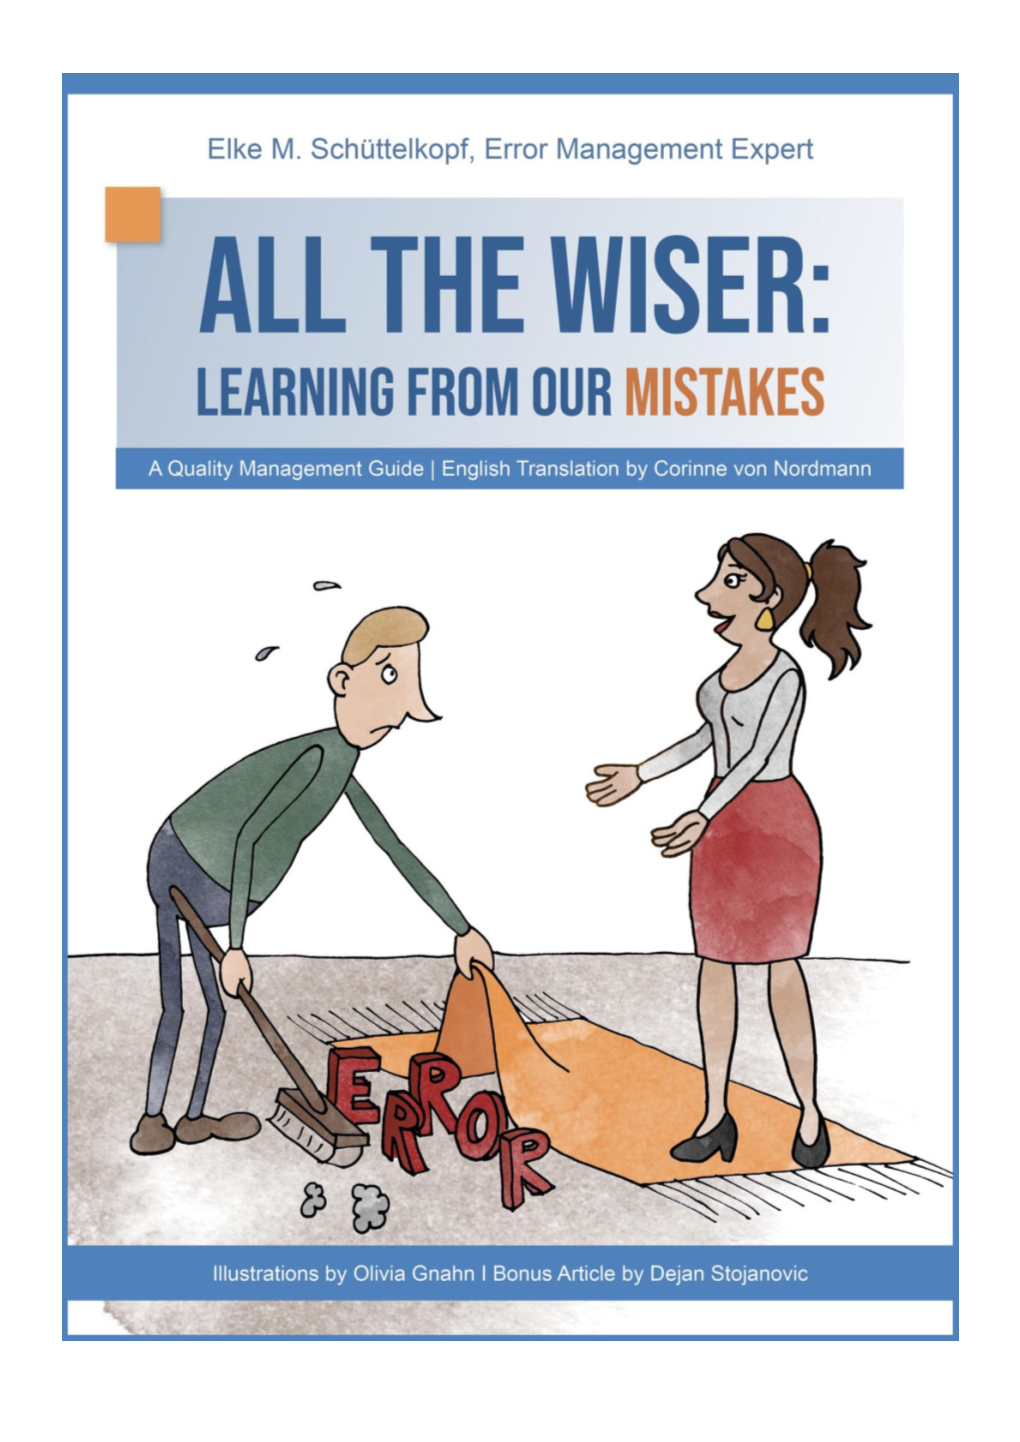 All the Wiser: Learning from Our Mistakes